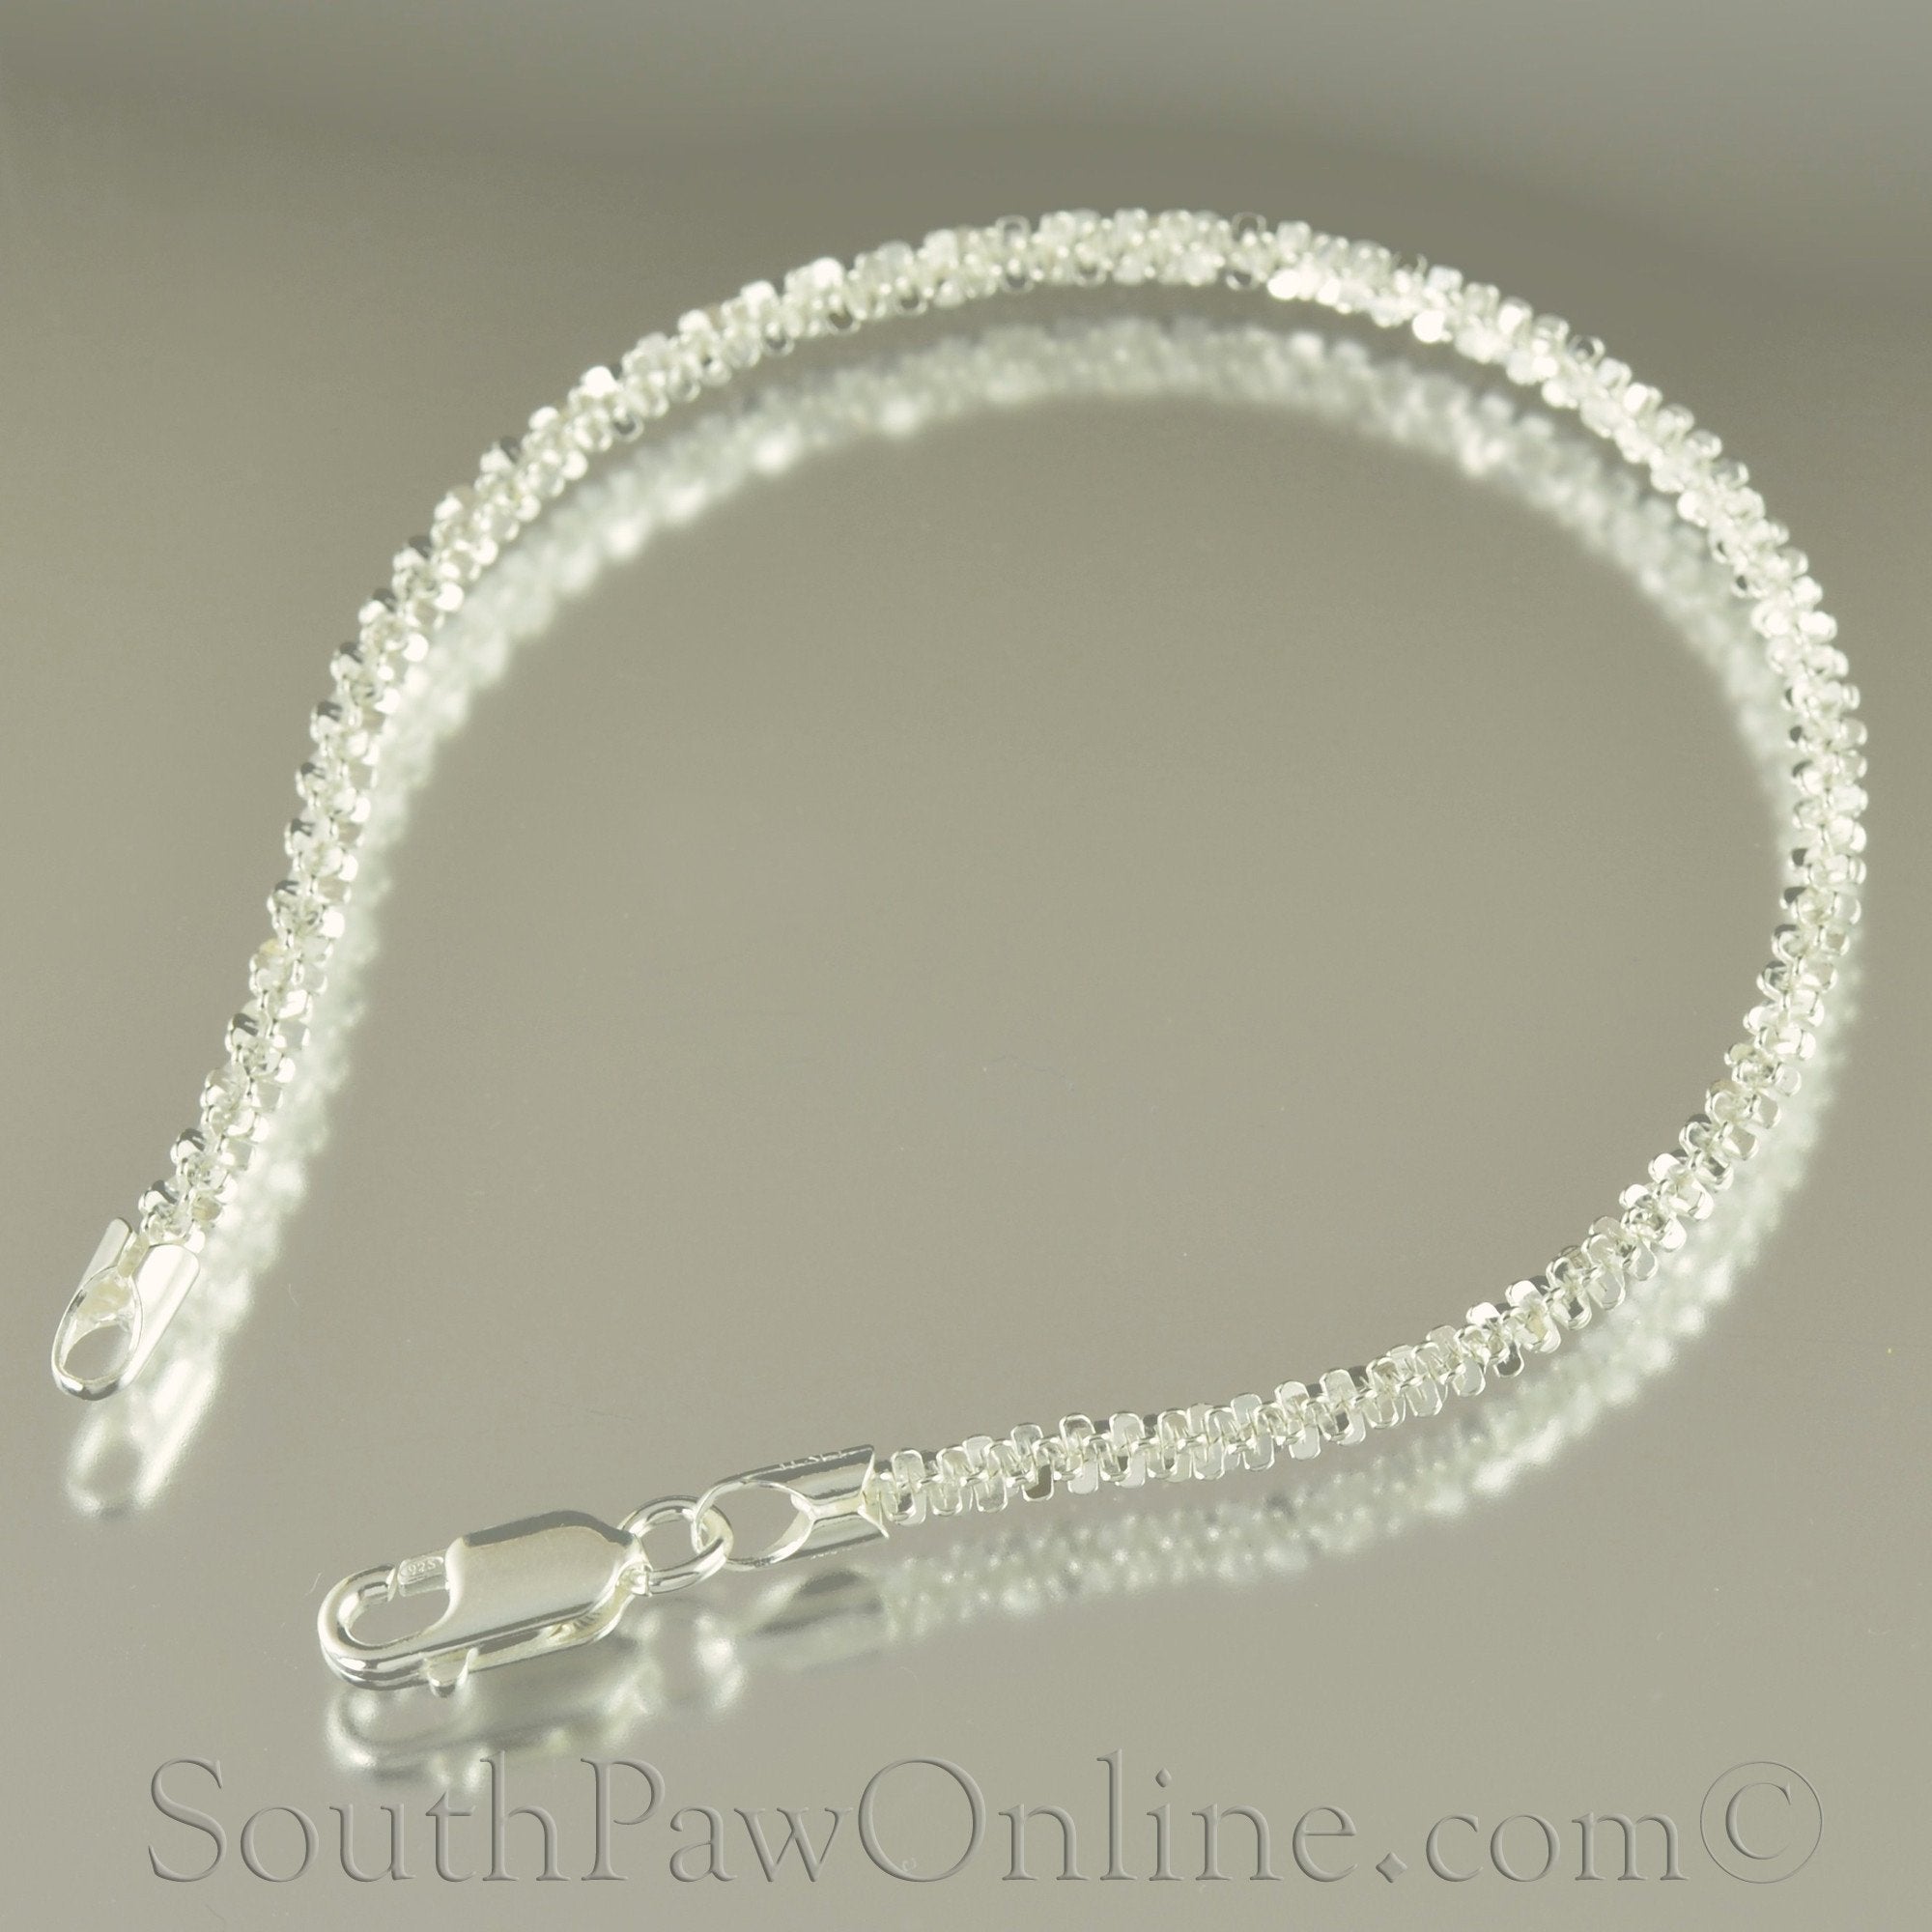 Fancy sterling silver bracelet, Made in Italy, 7 and 8 inches lengths